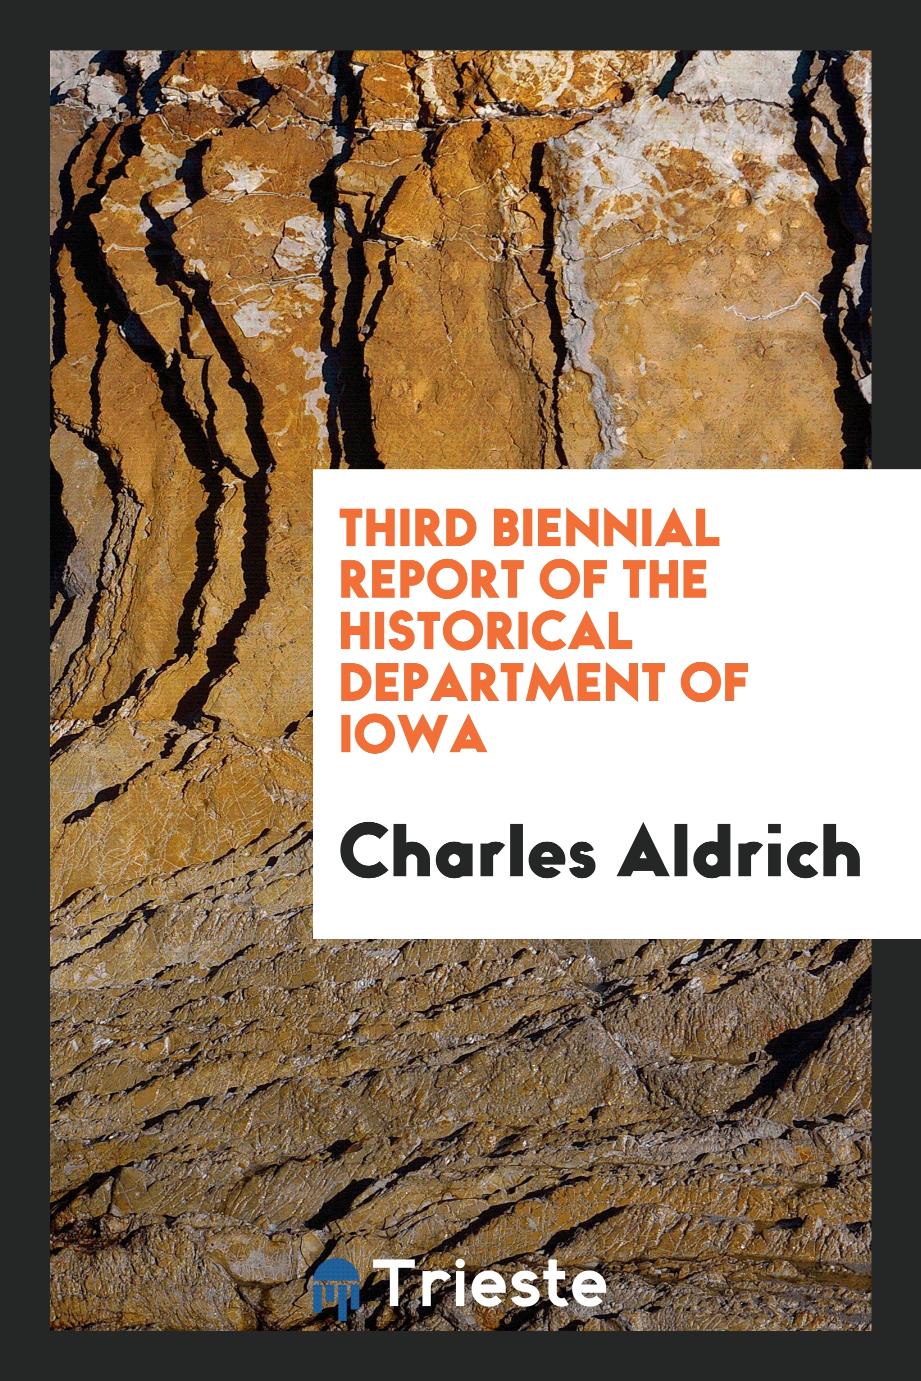 Third Biennial Report of the Historical Department of Iowa